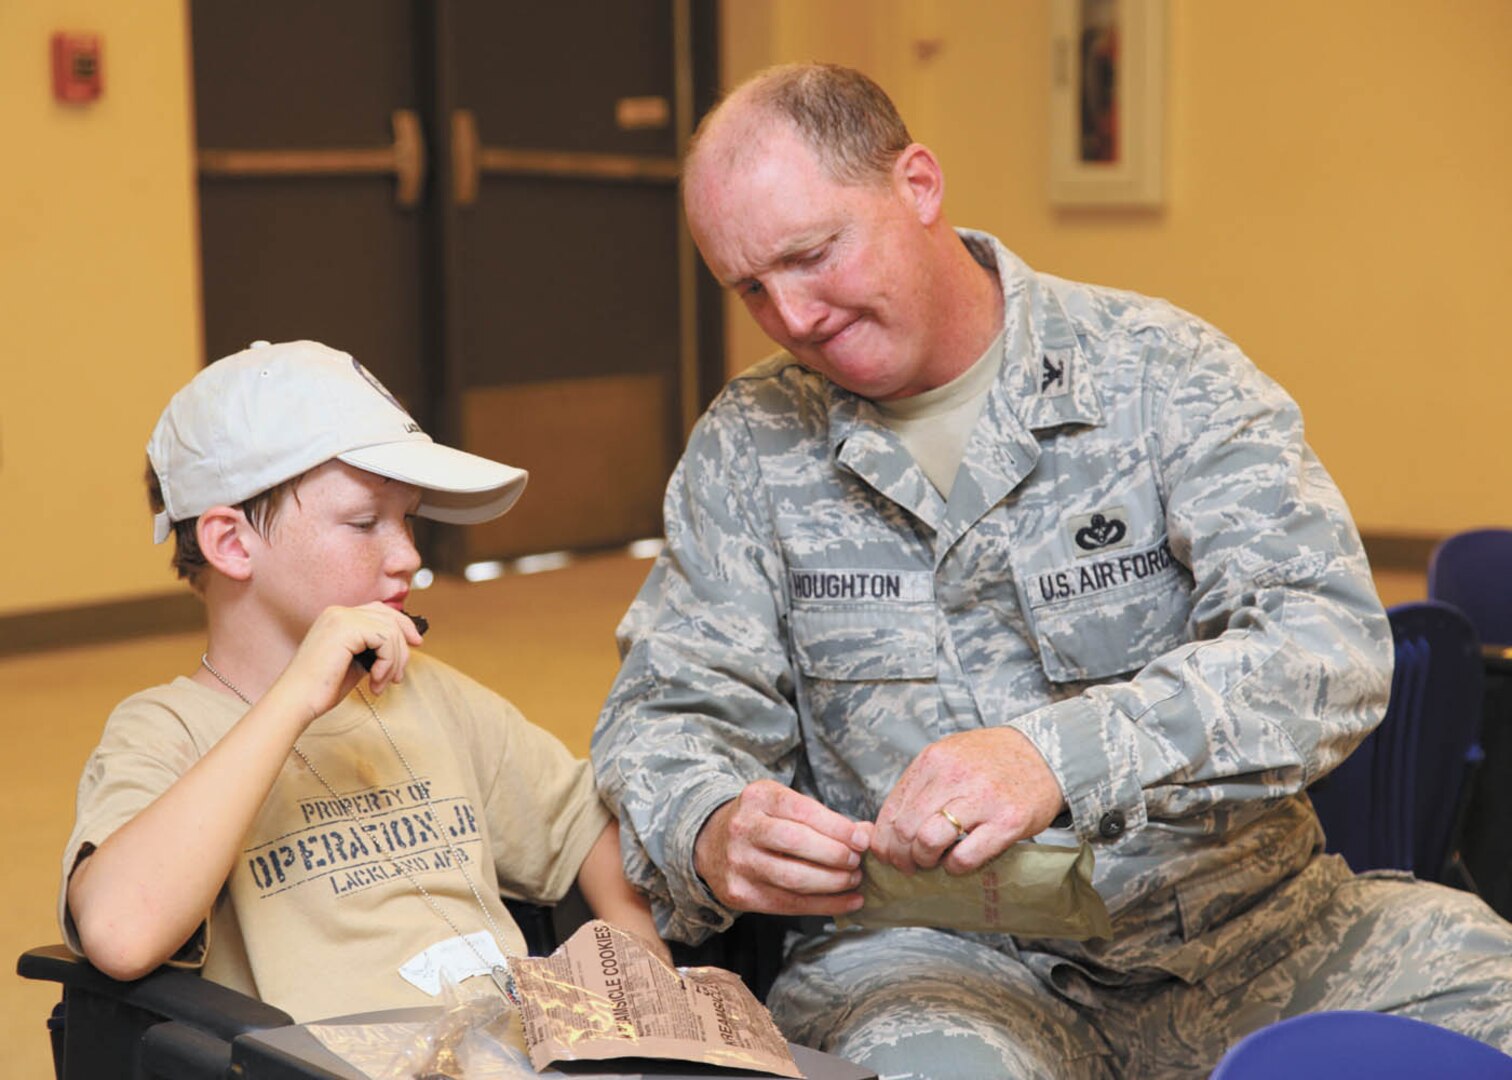 Col. Richard Houghton, 802nd Mission Support Group commander, helps his son, Ricky, with a Meal-Ready-to-Eat. (U.S. Air Force photo/Robbin Cresswell)